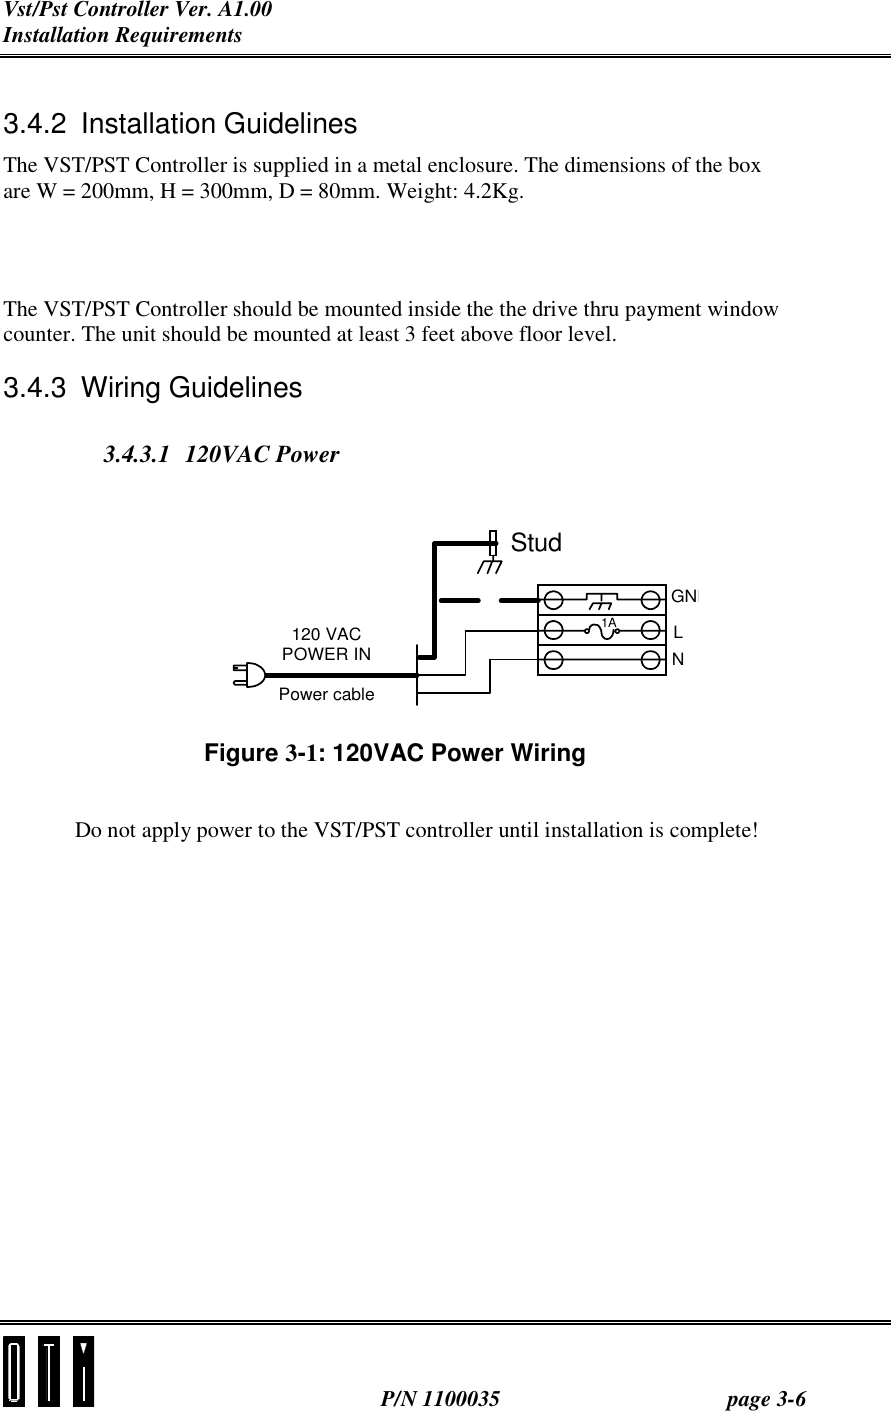 Vst/Pst Controller Ver. A1.00 Installation Requirements  P/N 1100035 page 3-6  3.4.2 Installation Guidelines The VST/PST Controller is supplied in a metal enclosure. The dimensions of the box are W = 200mm, H = 300mm, D = 80mm. Weight: 4.2Kg. The VST/PST Controller should be mounted inside the the drive thru payment window counter. The unit should be mounted at least 3 feet above floor level. 3.4.3 Wiring Guidelines 3.4.3.1 120VAC Power Figure 3-1: 120VAC Power Wiring   Do not apply power to the VST/PST controller until installation is complete!    GNDLN120 VACPOWER INPower cable1AStud